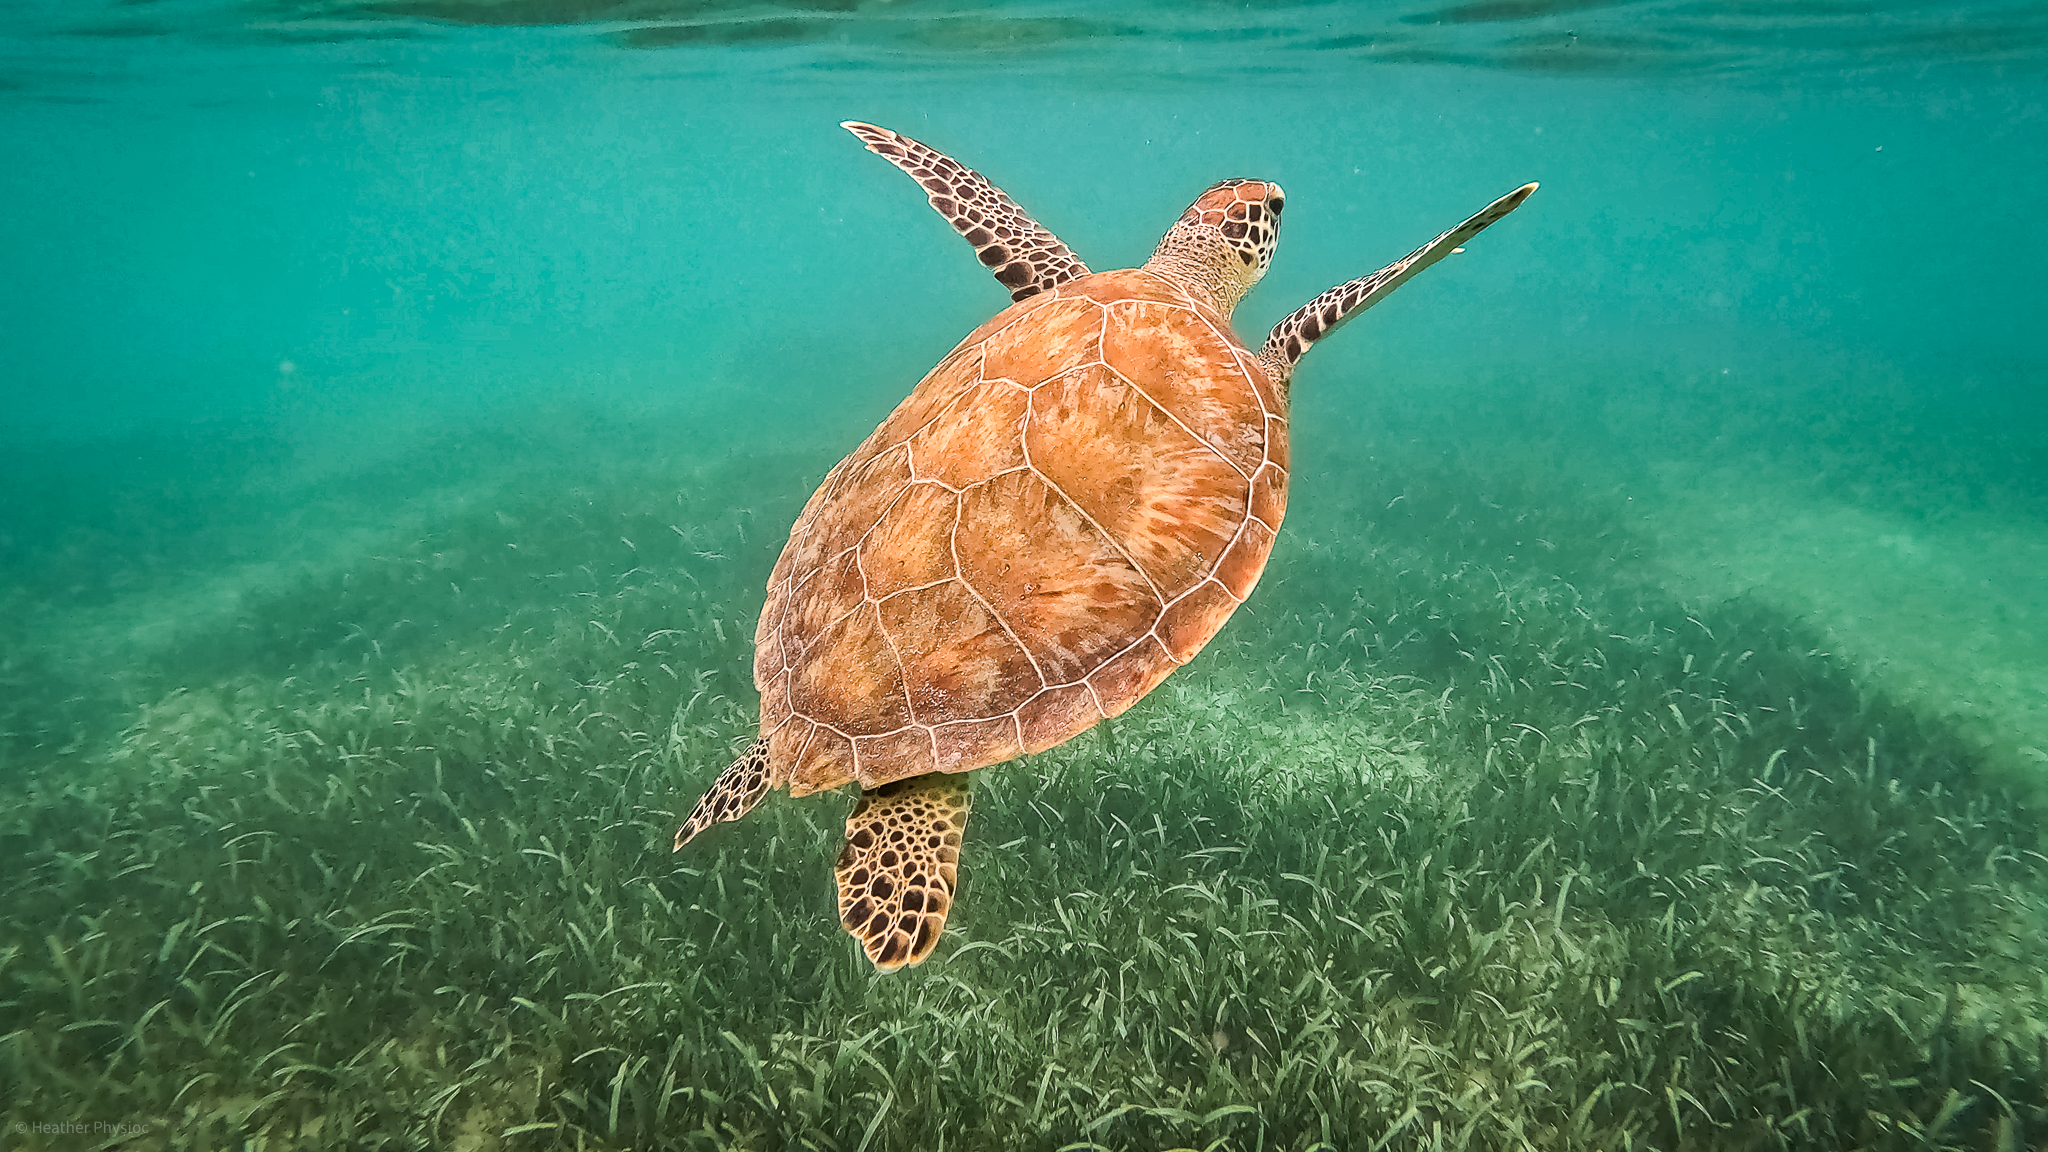 A green sea turtle elegantly gliding through the water and coming up for air, with its shell contrasting against the vibrant underwater grasses of Akumal Bay in Yucatan, Mexico, capturing the serene beauty of marine life